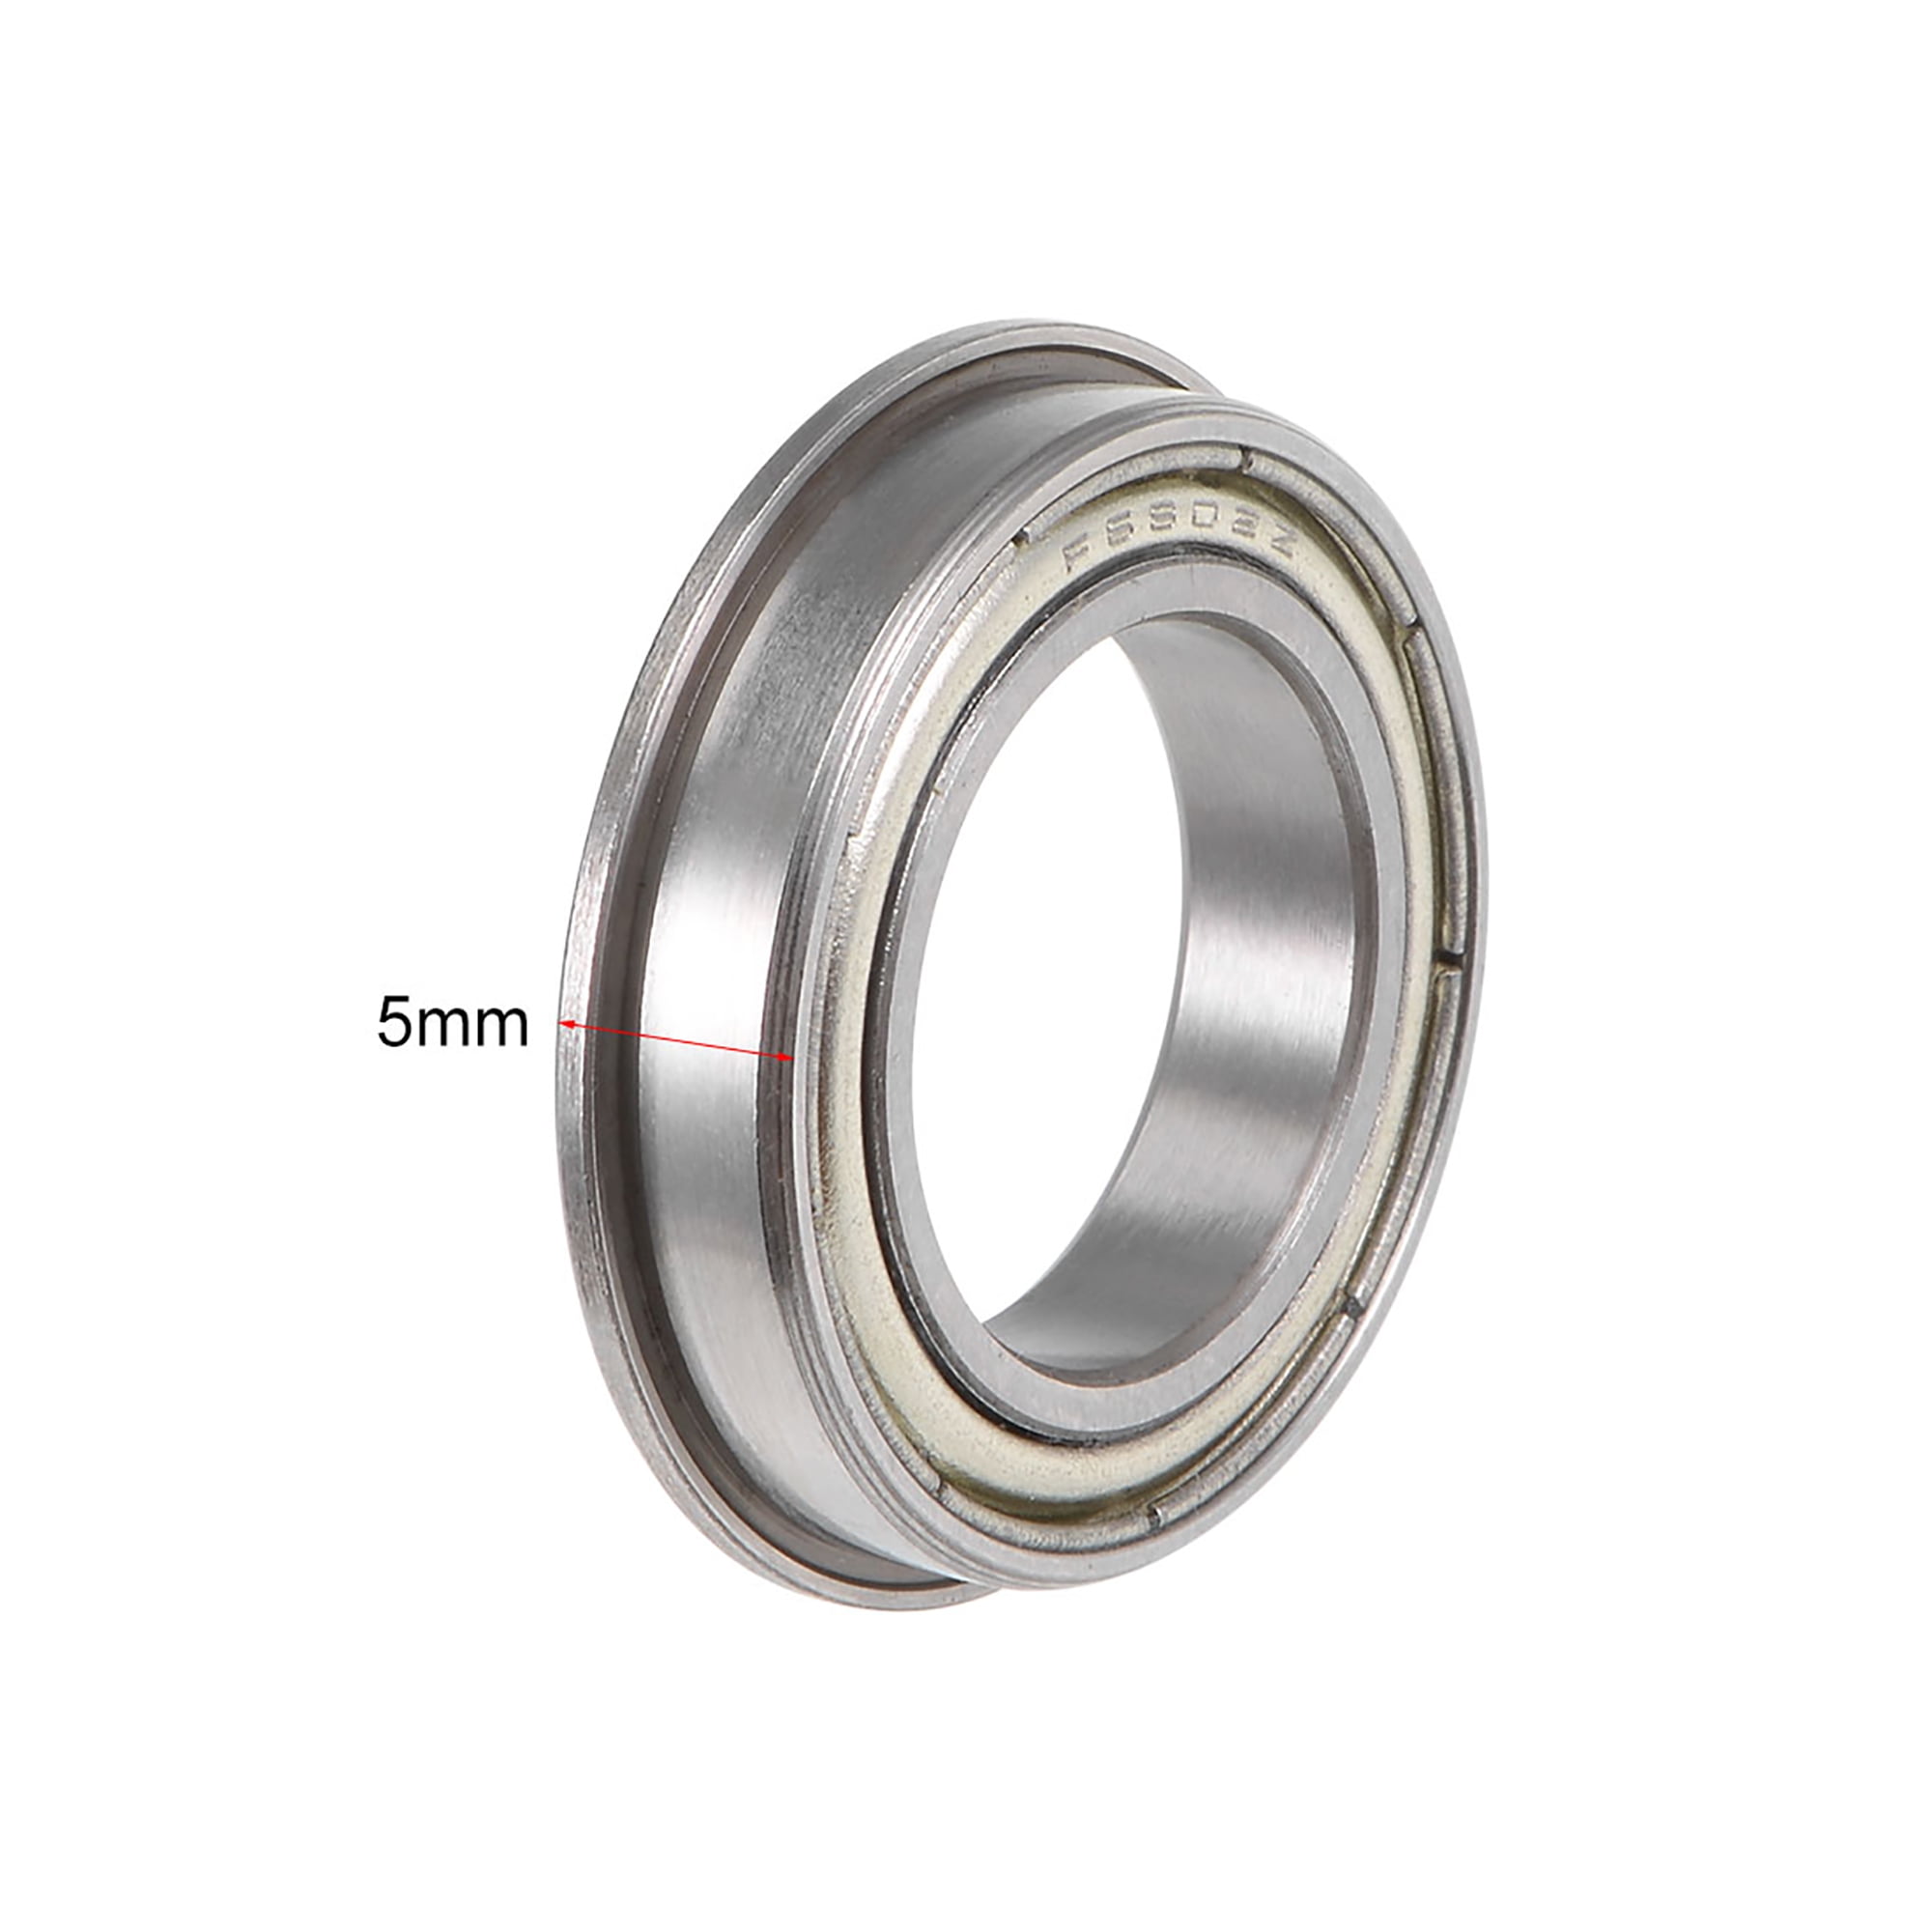 15mm*24mm*5mm 2 x F6802zz Metal Double Shielded  Flanged  Ball Bearings 